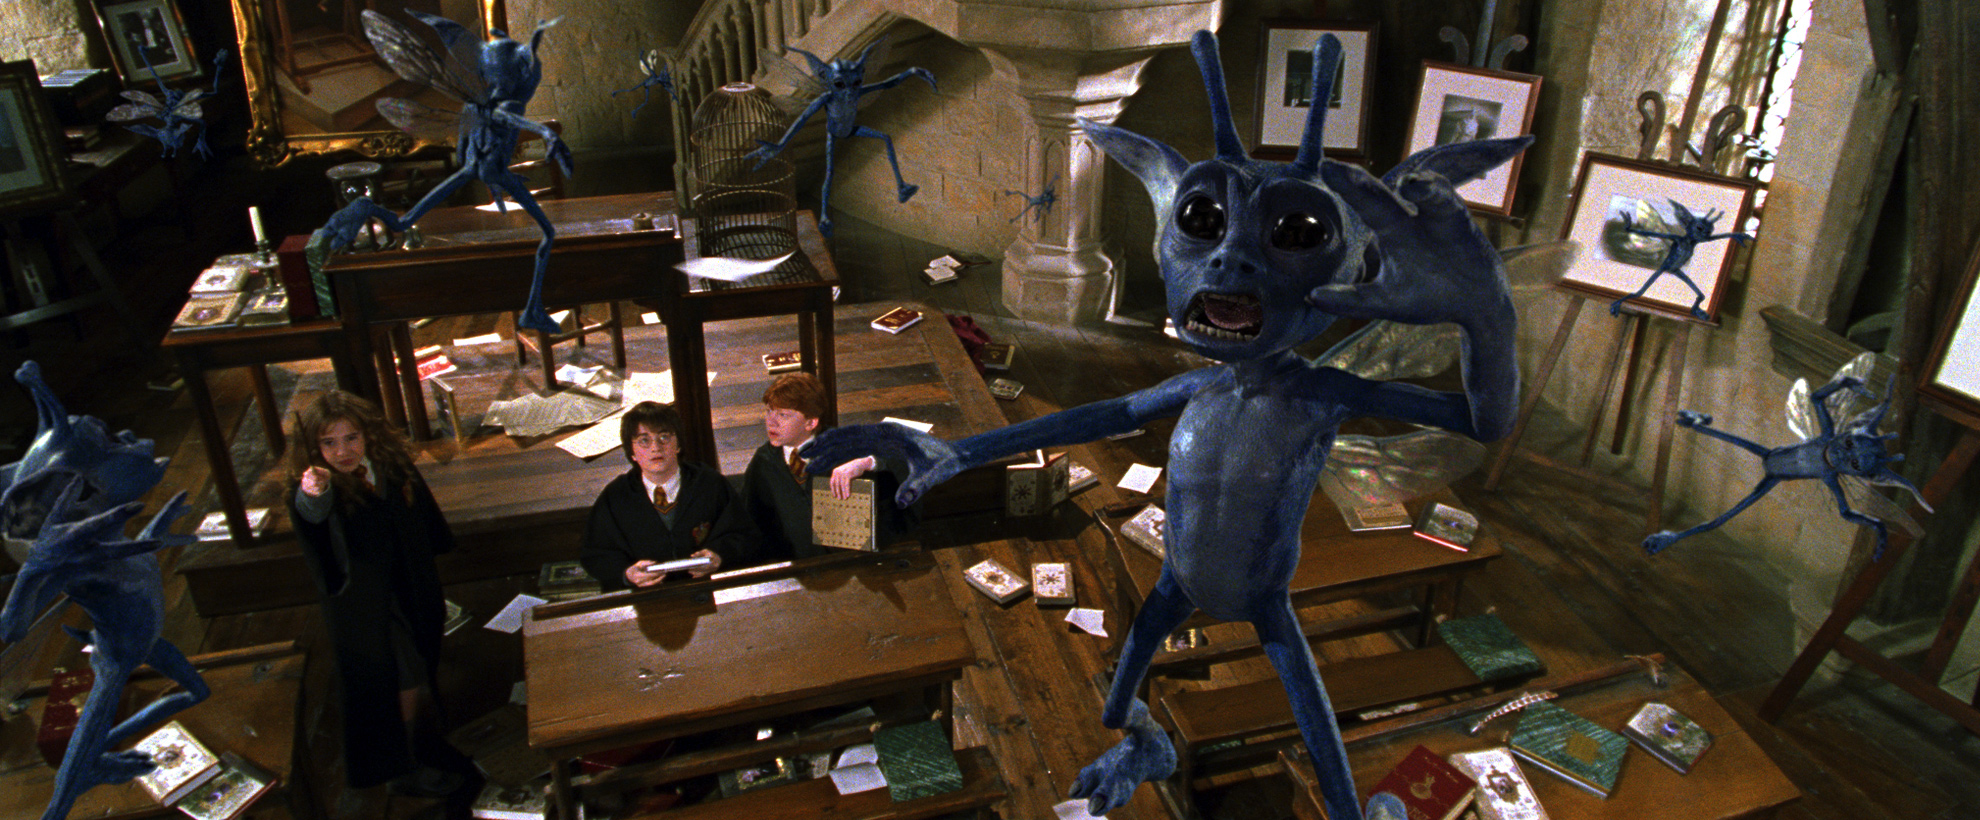 A scene from the Chamber of Secrets. Hermione, Harry and Ron are in a classroom surrounded by dazed, blue pixies